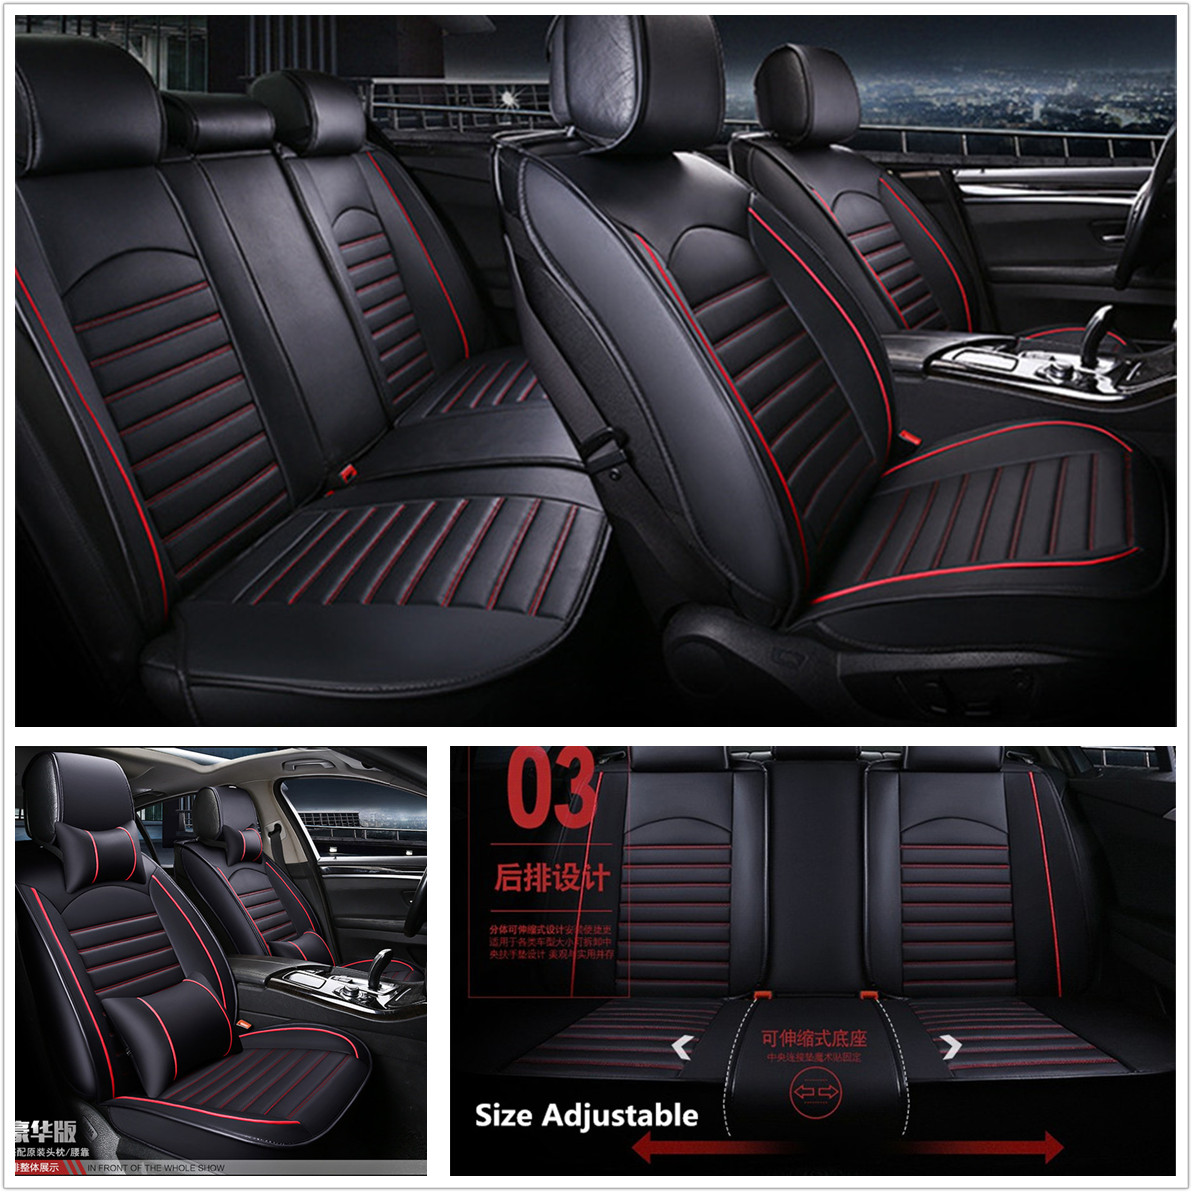 Details About Deluxe Edition Leather Car Seat Cover Cushion Full Set Car Interior Accessories